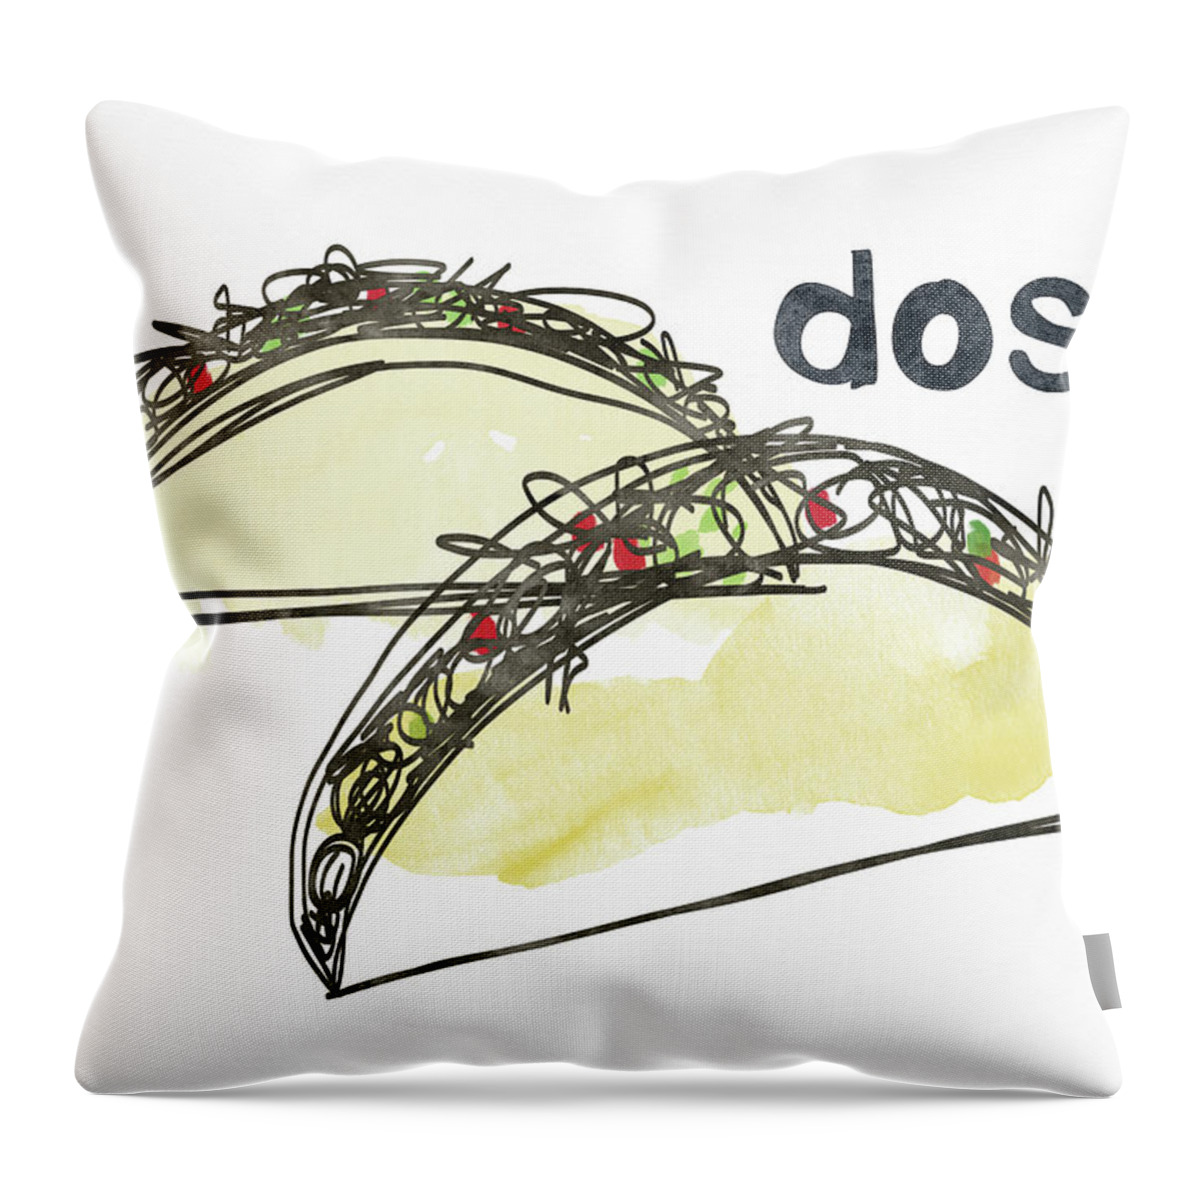 Tacos Throw Pillow featuring the painting Dos Tacos- Art by Linda Woods by Linda Woods